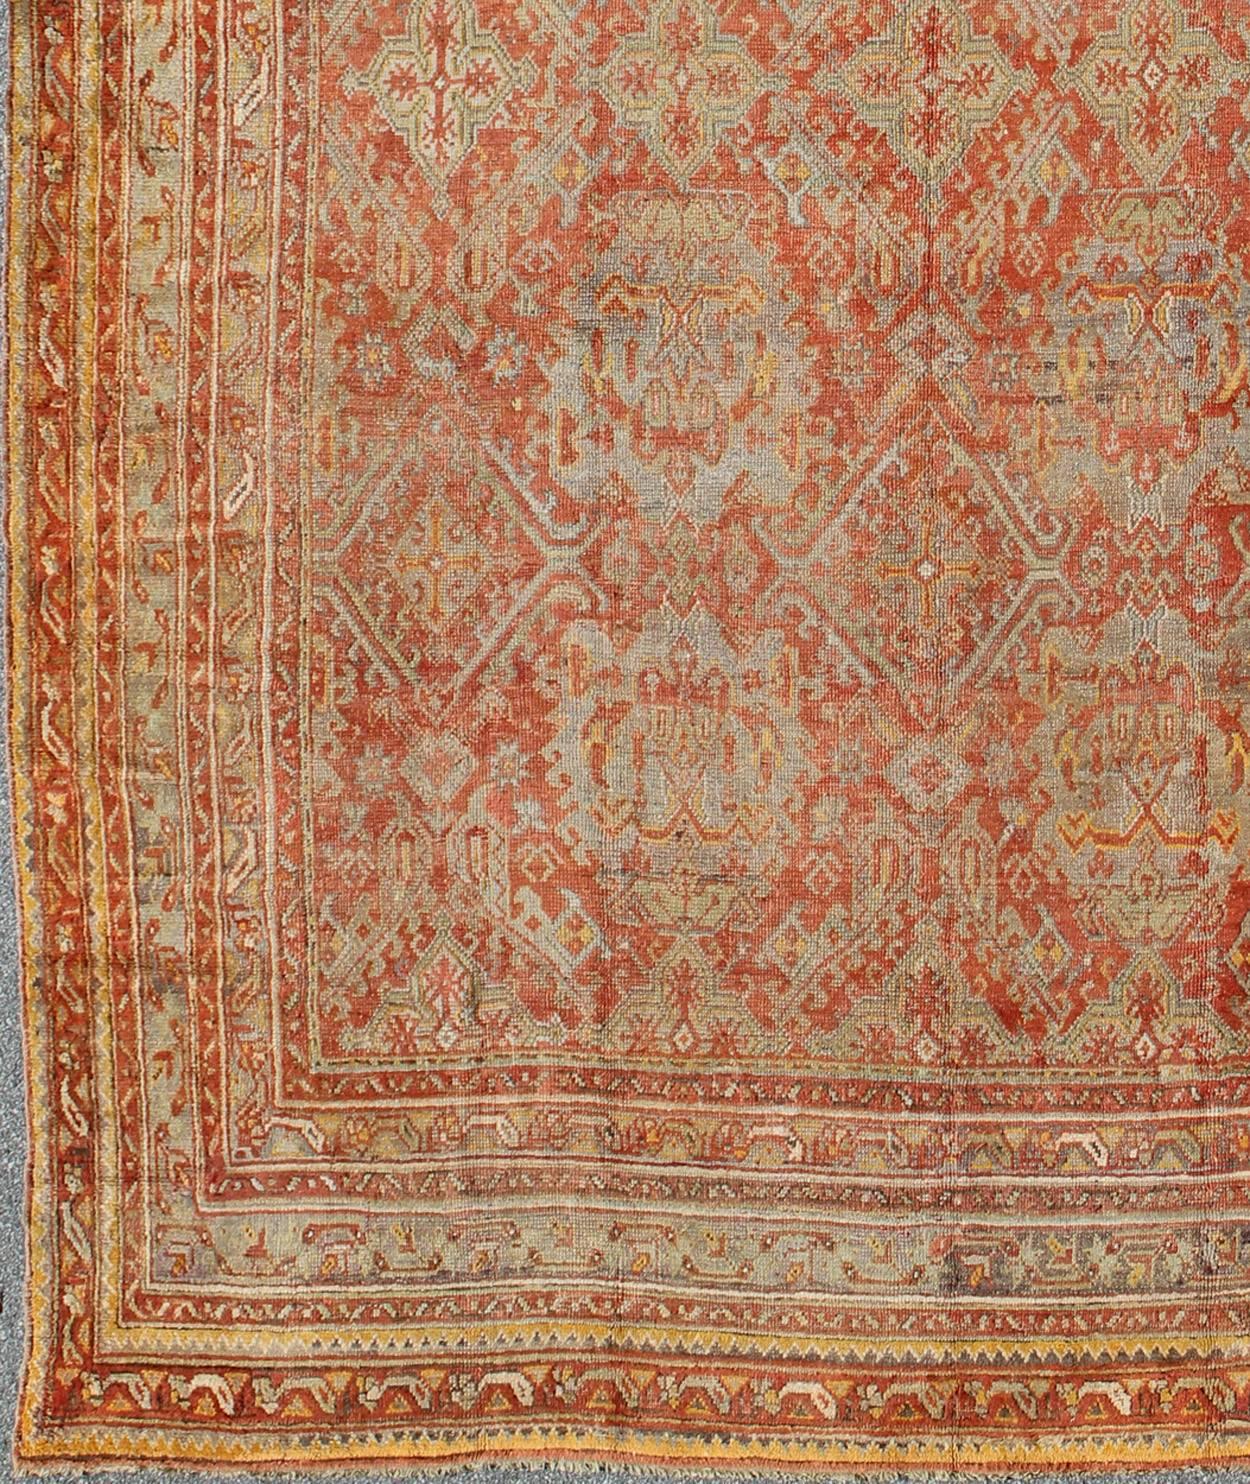 Antique Turkish Oushak Rug with Geometric Design in Soft Red, Light Blue, Yellow, Taupe and Gray.  Antique Oushak / Keivan Woven Arts / rug VR-6061, country of origin / type: Turkey / Oushak, circa Early-20th century
Measures: 12' x 17'.
This